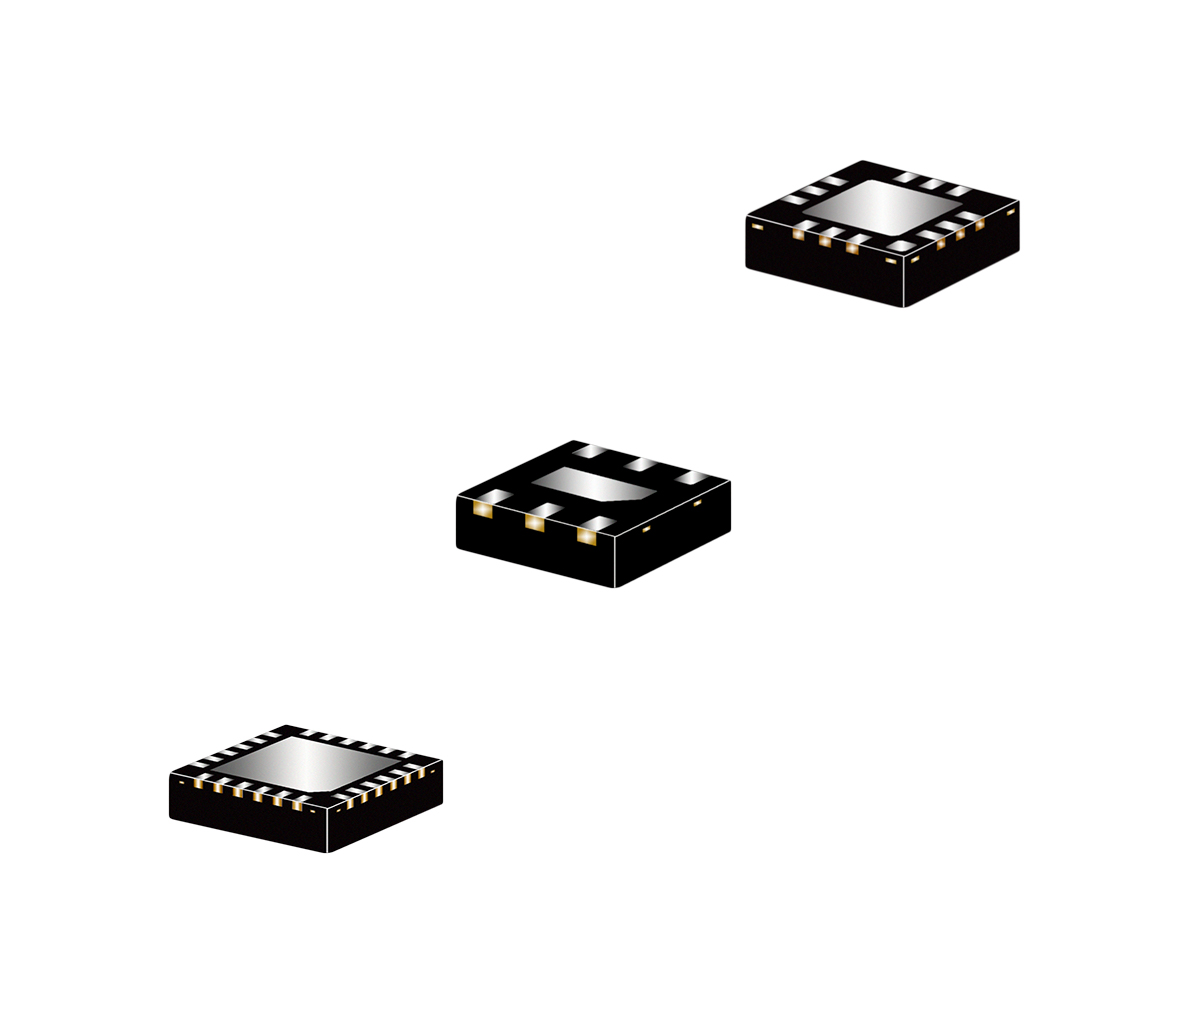 Three different MMIC Reflectionless filters